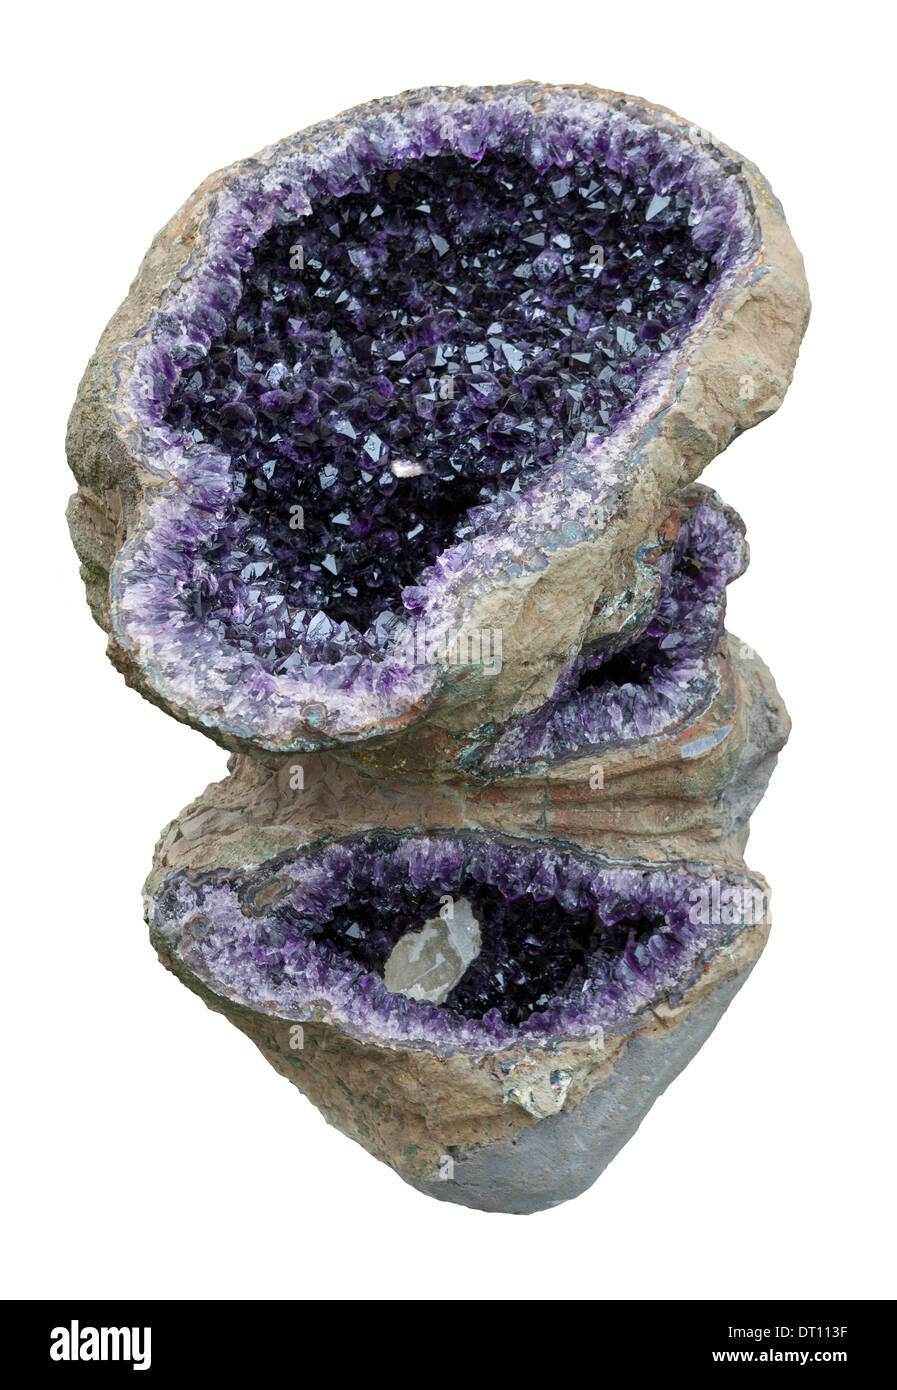 Amethyst is a violet variety of quartz often used in jewelry. Stock Photo